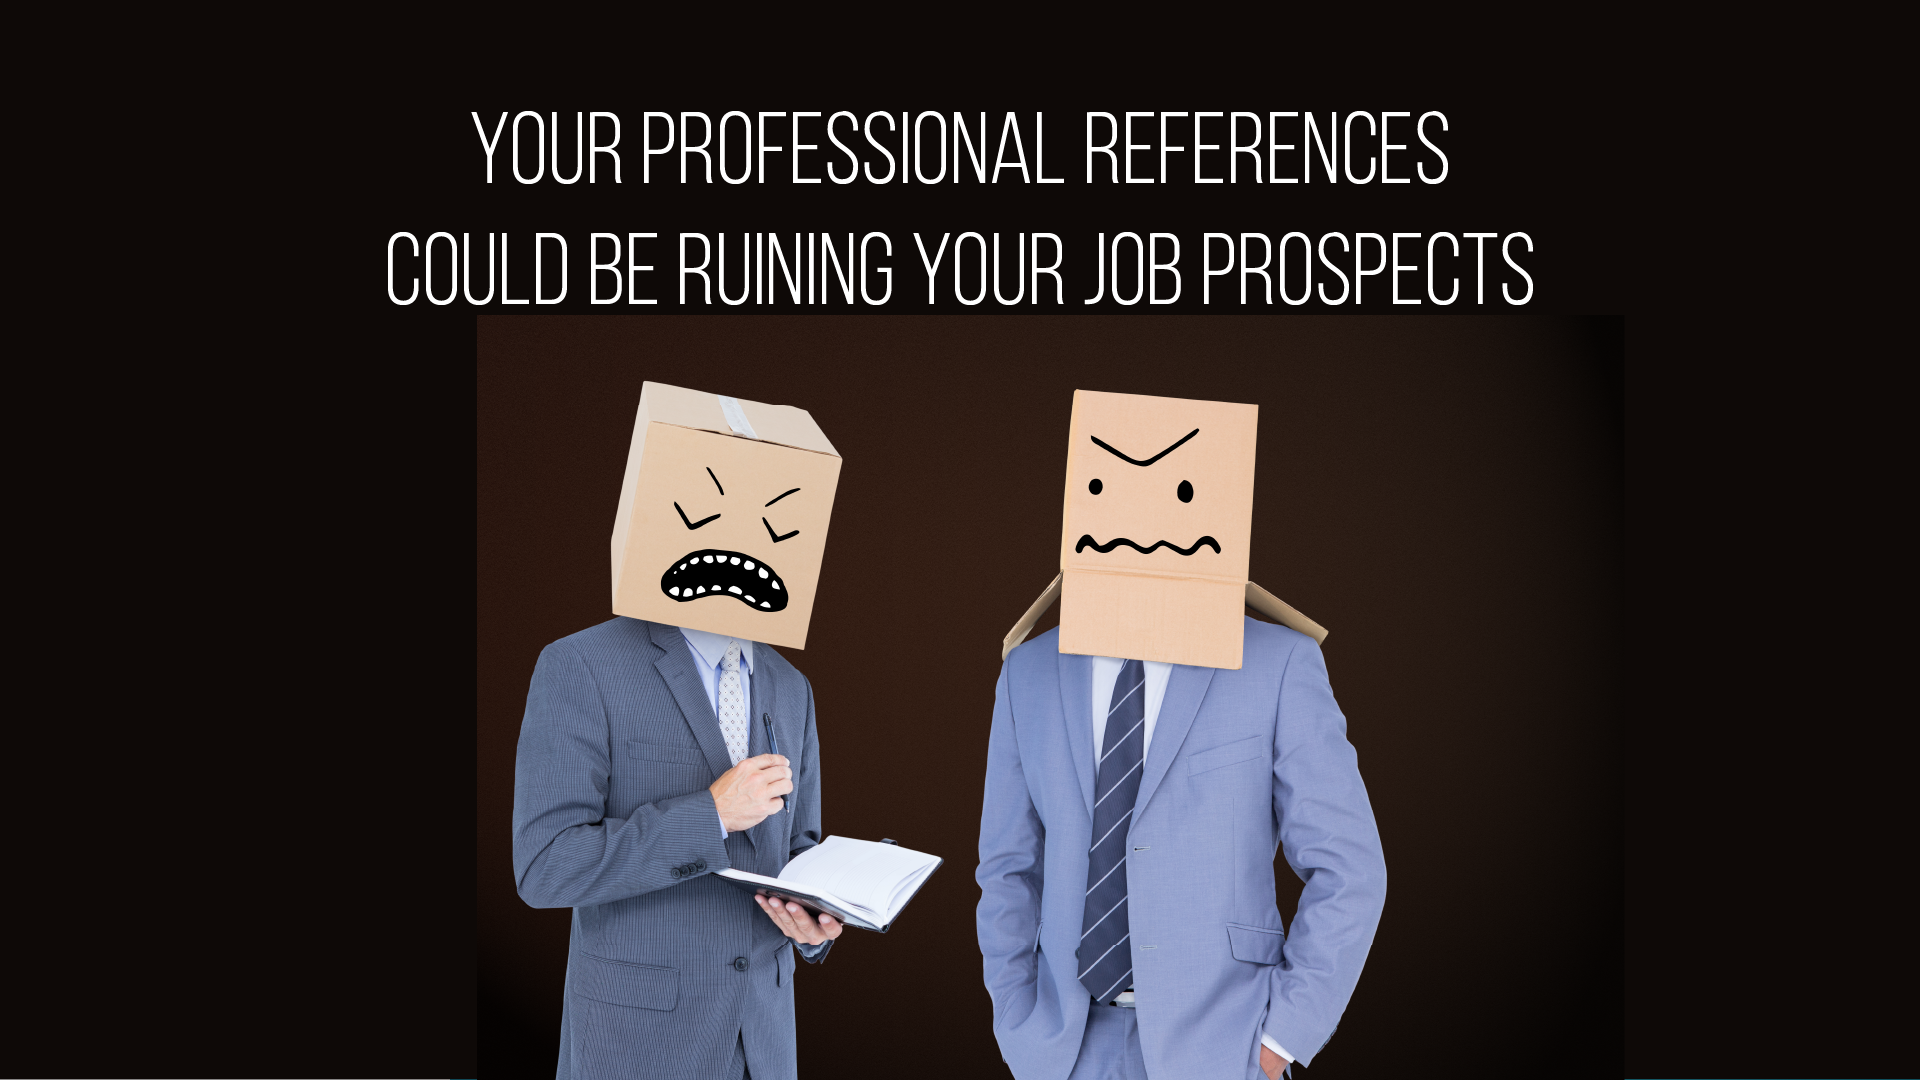 Your Professional References Could Be Ruining Your Job Prospects